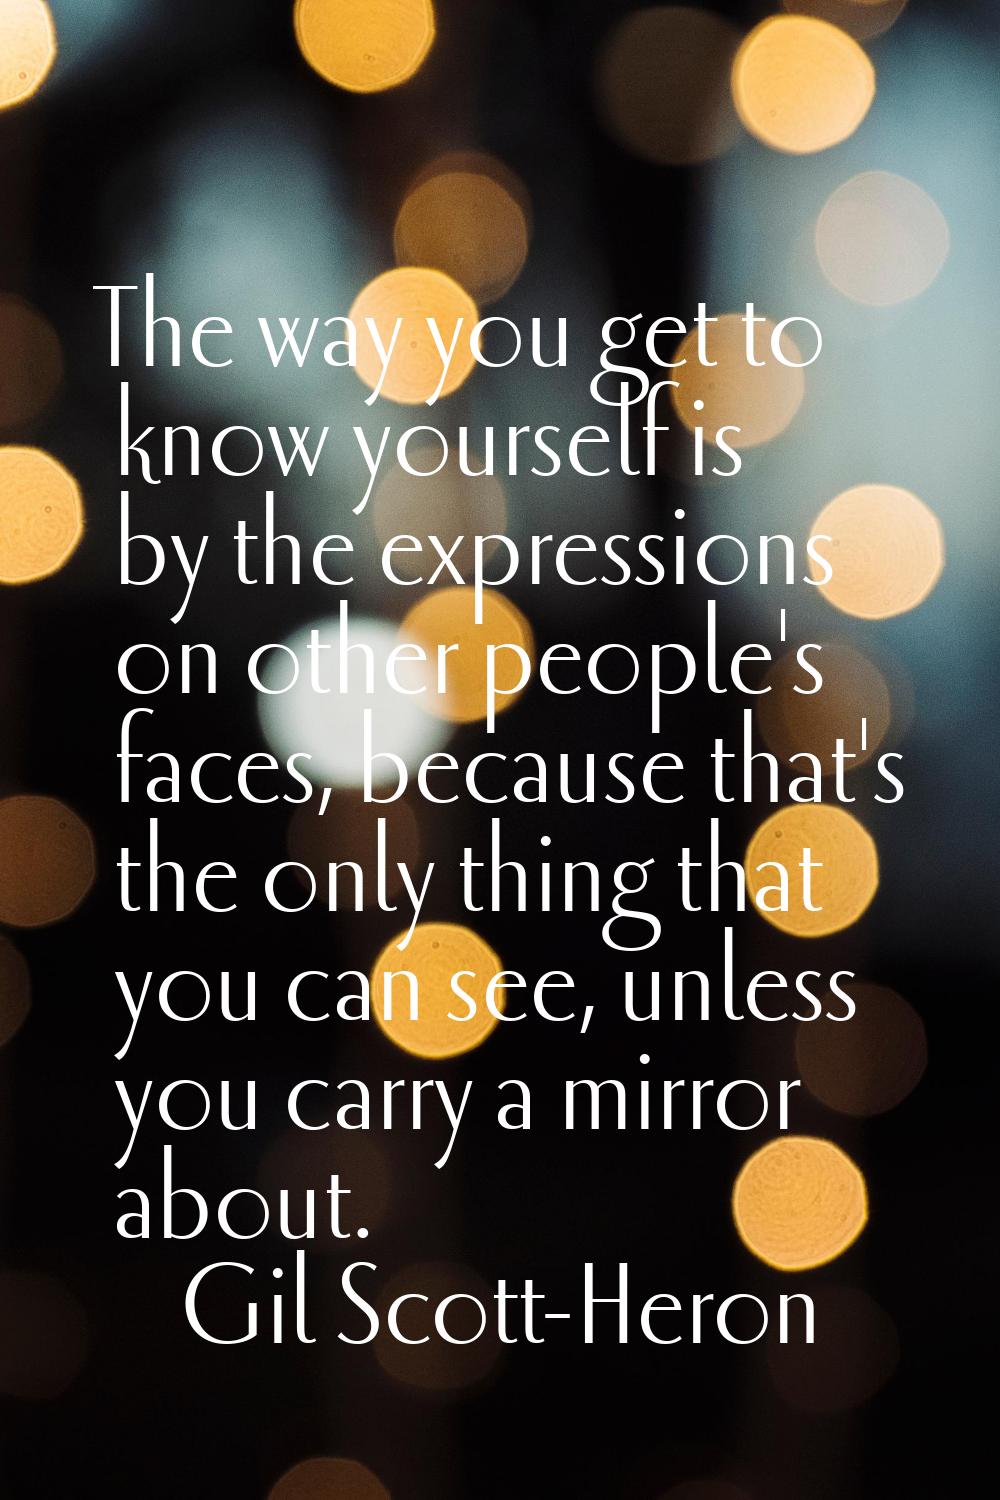 The way you get to know yourself is by the expressions on other people's faces, because that's the 